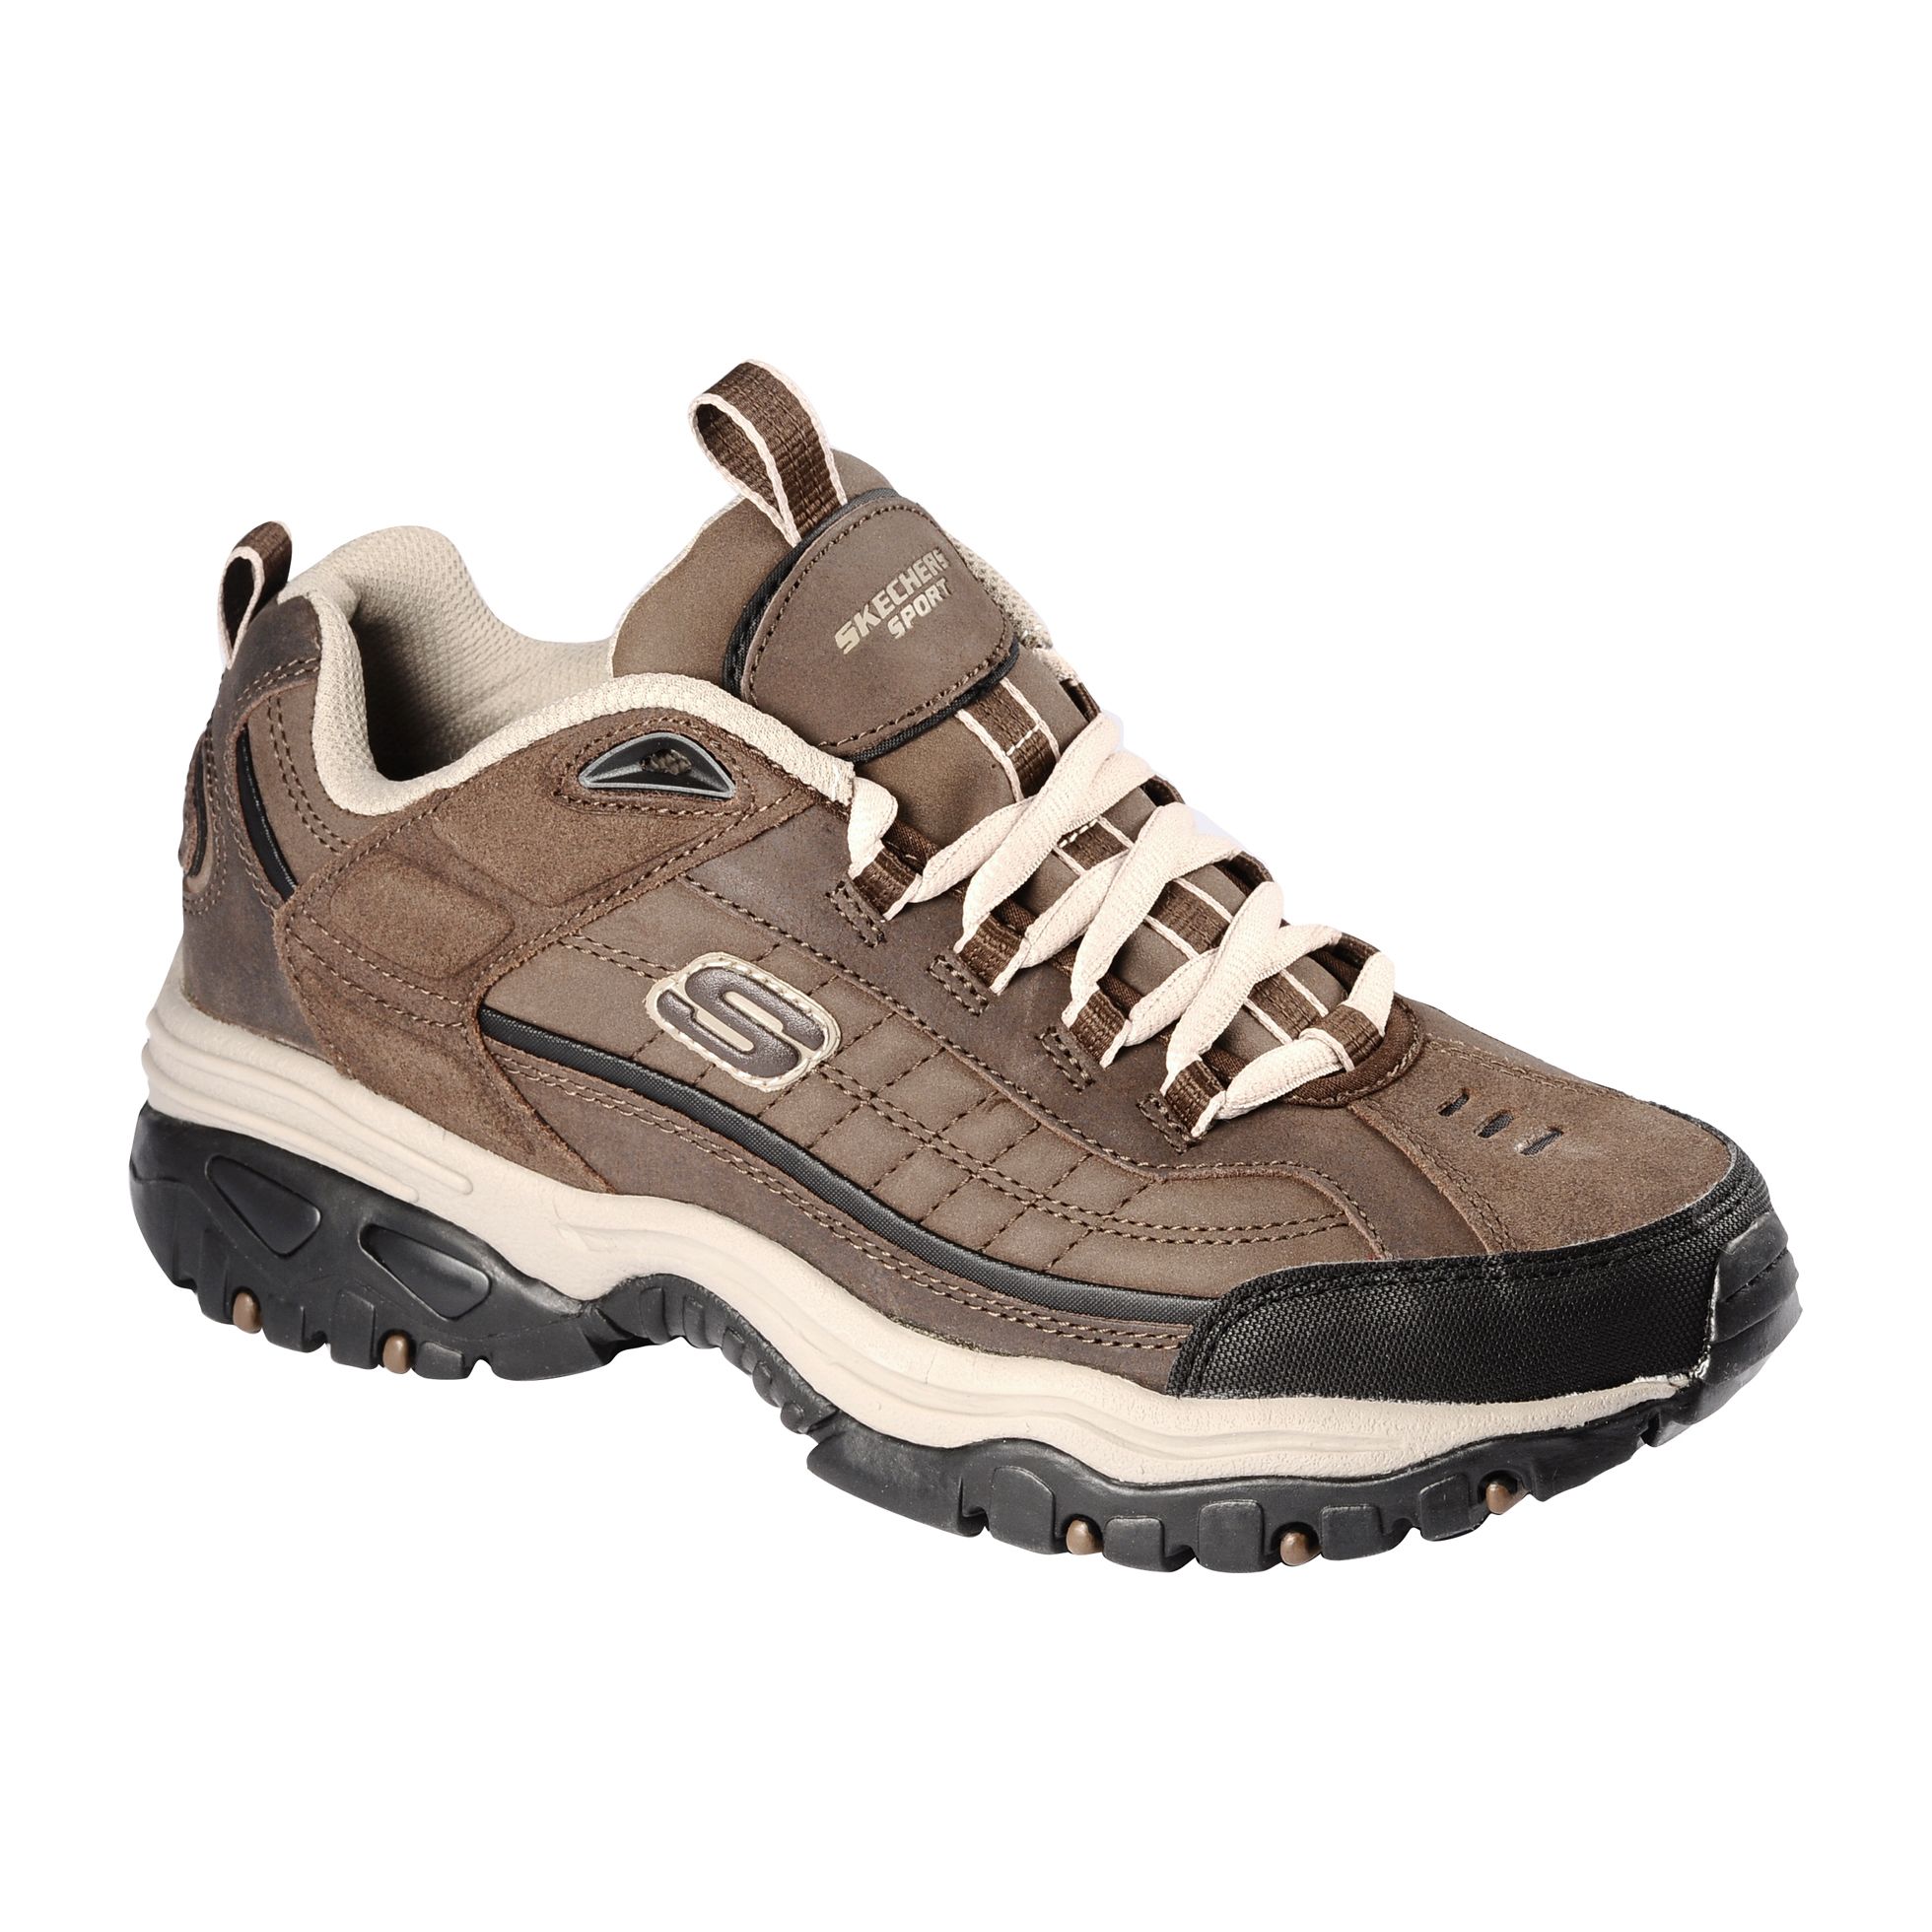 Skechers Men's Downforce Casual Athletic Shoe - Brown Wide Width Available